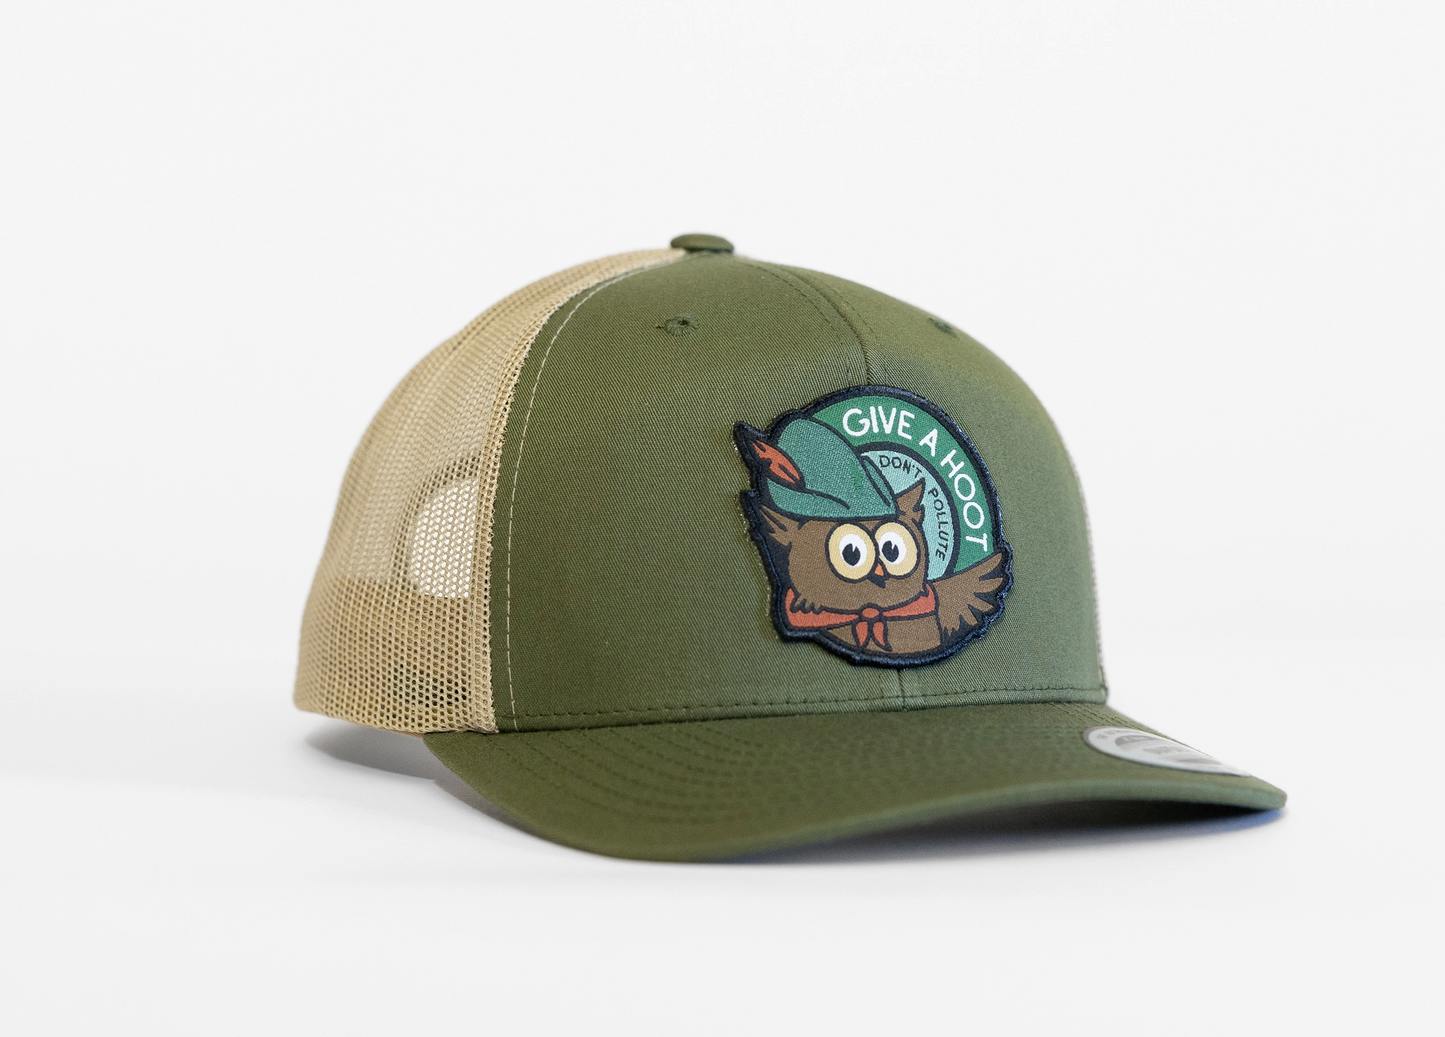 Give A Hoot, Don't Pollute Mesh Trucker Hat